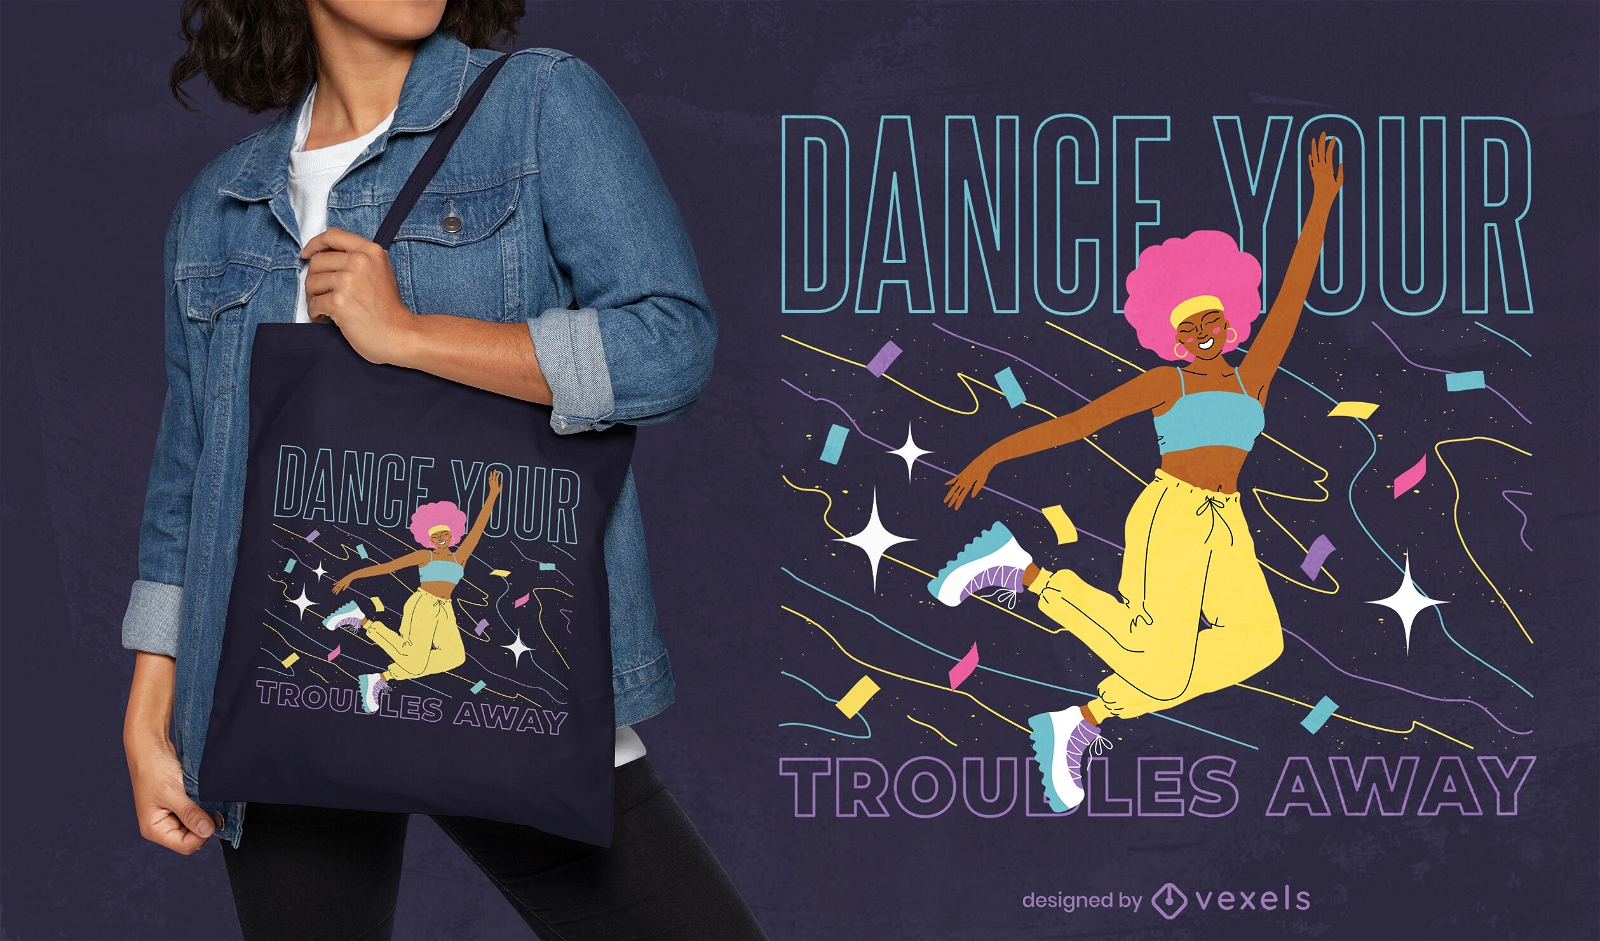 Dance your troubles away tote bag design